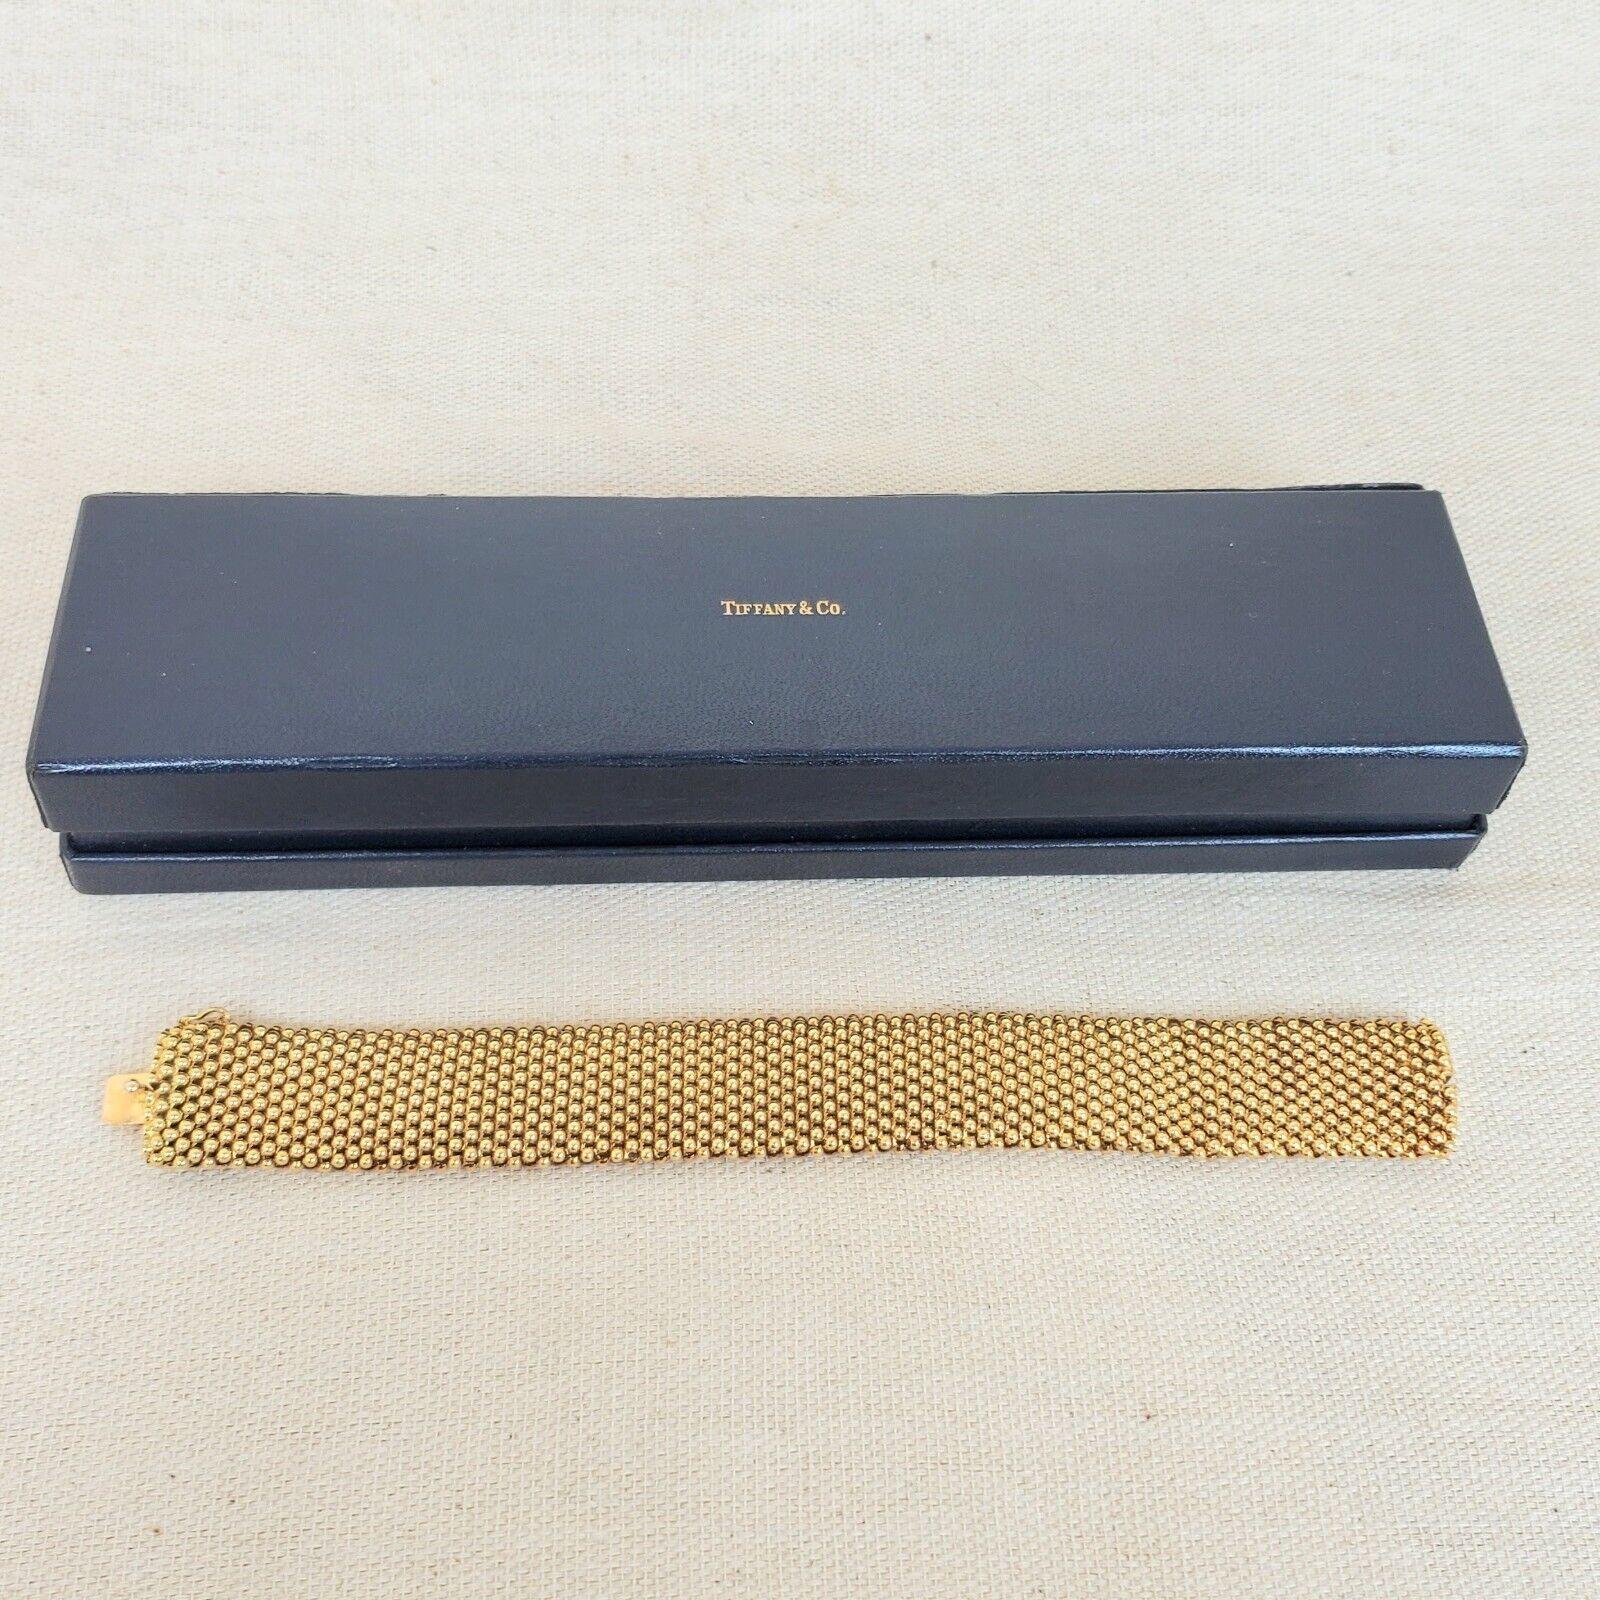 Tiffany & Co. Italy 18k Yellow Gold Bracelet w/Box Circa 1960s

Here is your chance to purchase a beautiful and highly collectible designer bracelet.  

Vintage Tiffany & Co. 18K Yellow Gold Beaded Mesh Bracelet 50.9 Grams with Tiffany Box (box